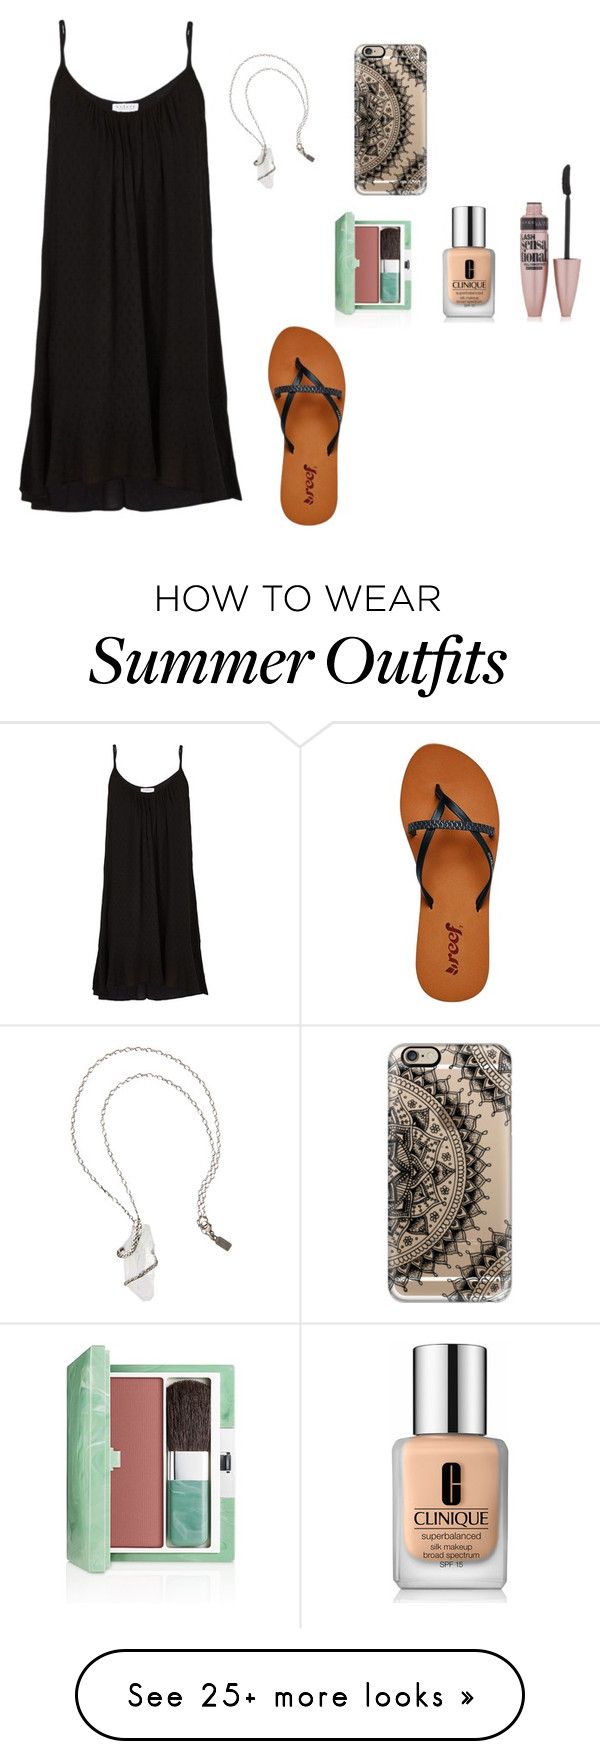 "Summer outfit" by emipooh on Polyvore featuring Velvet, Reef, Cliniqu...